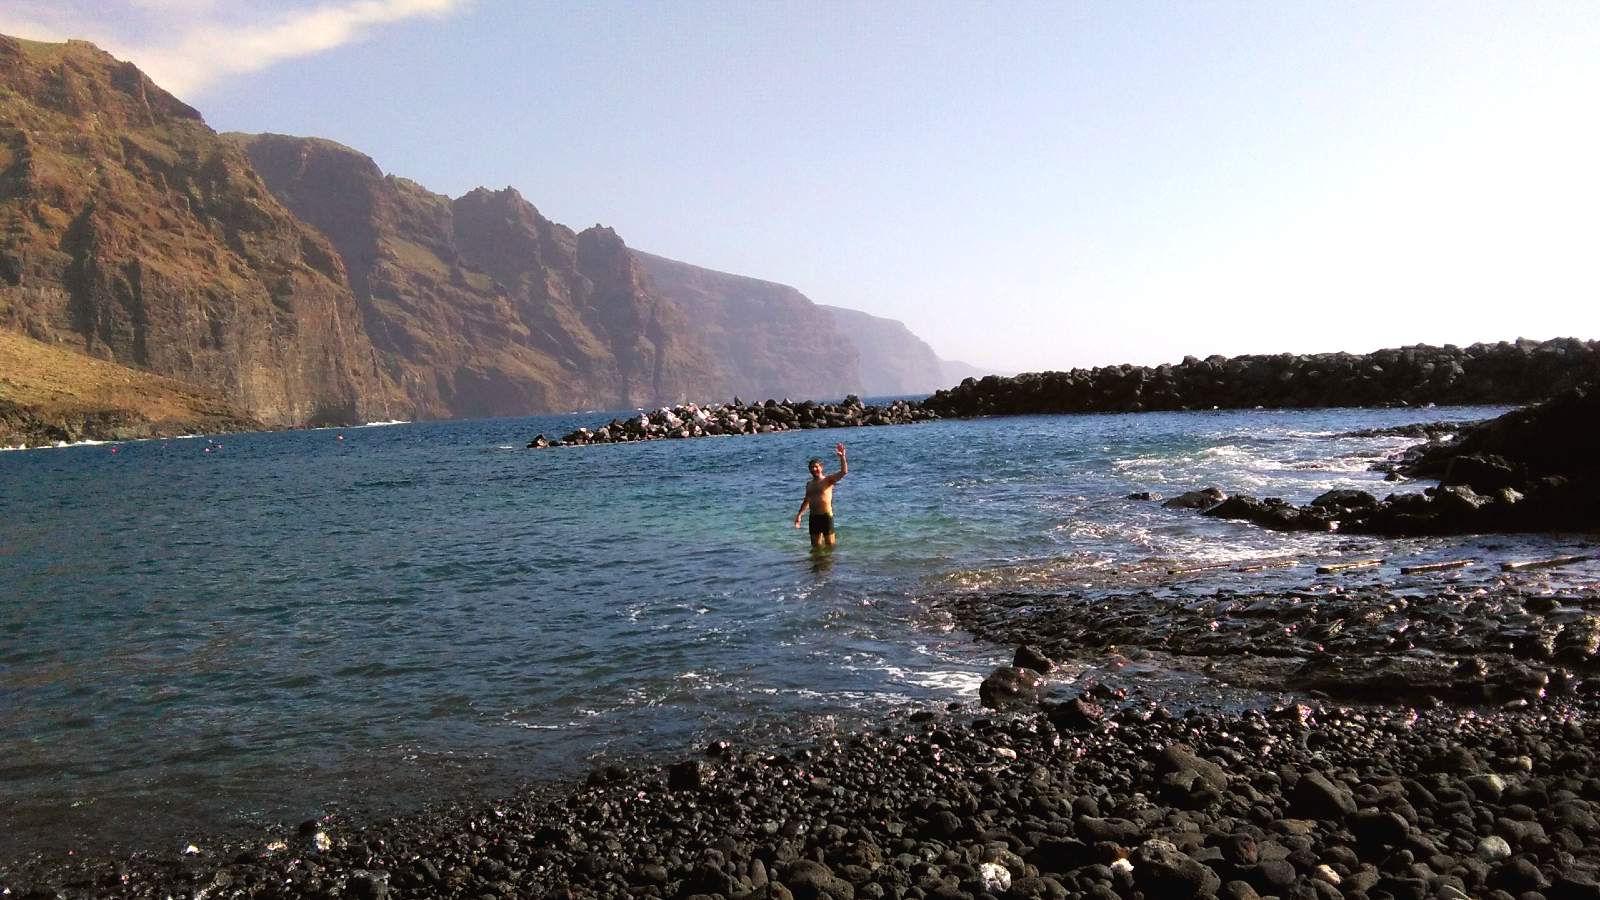 Bath in the Atlantic Ocean with views of the cliffs of Los Gigantes